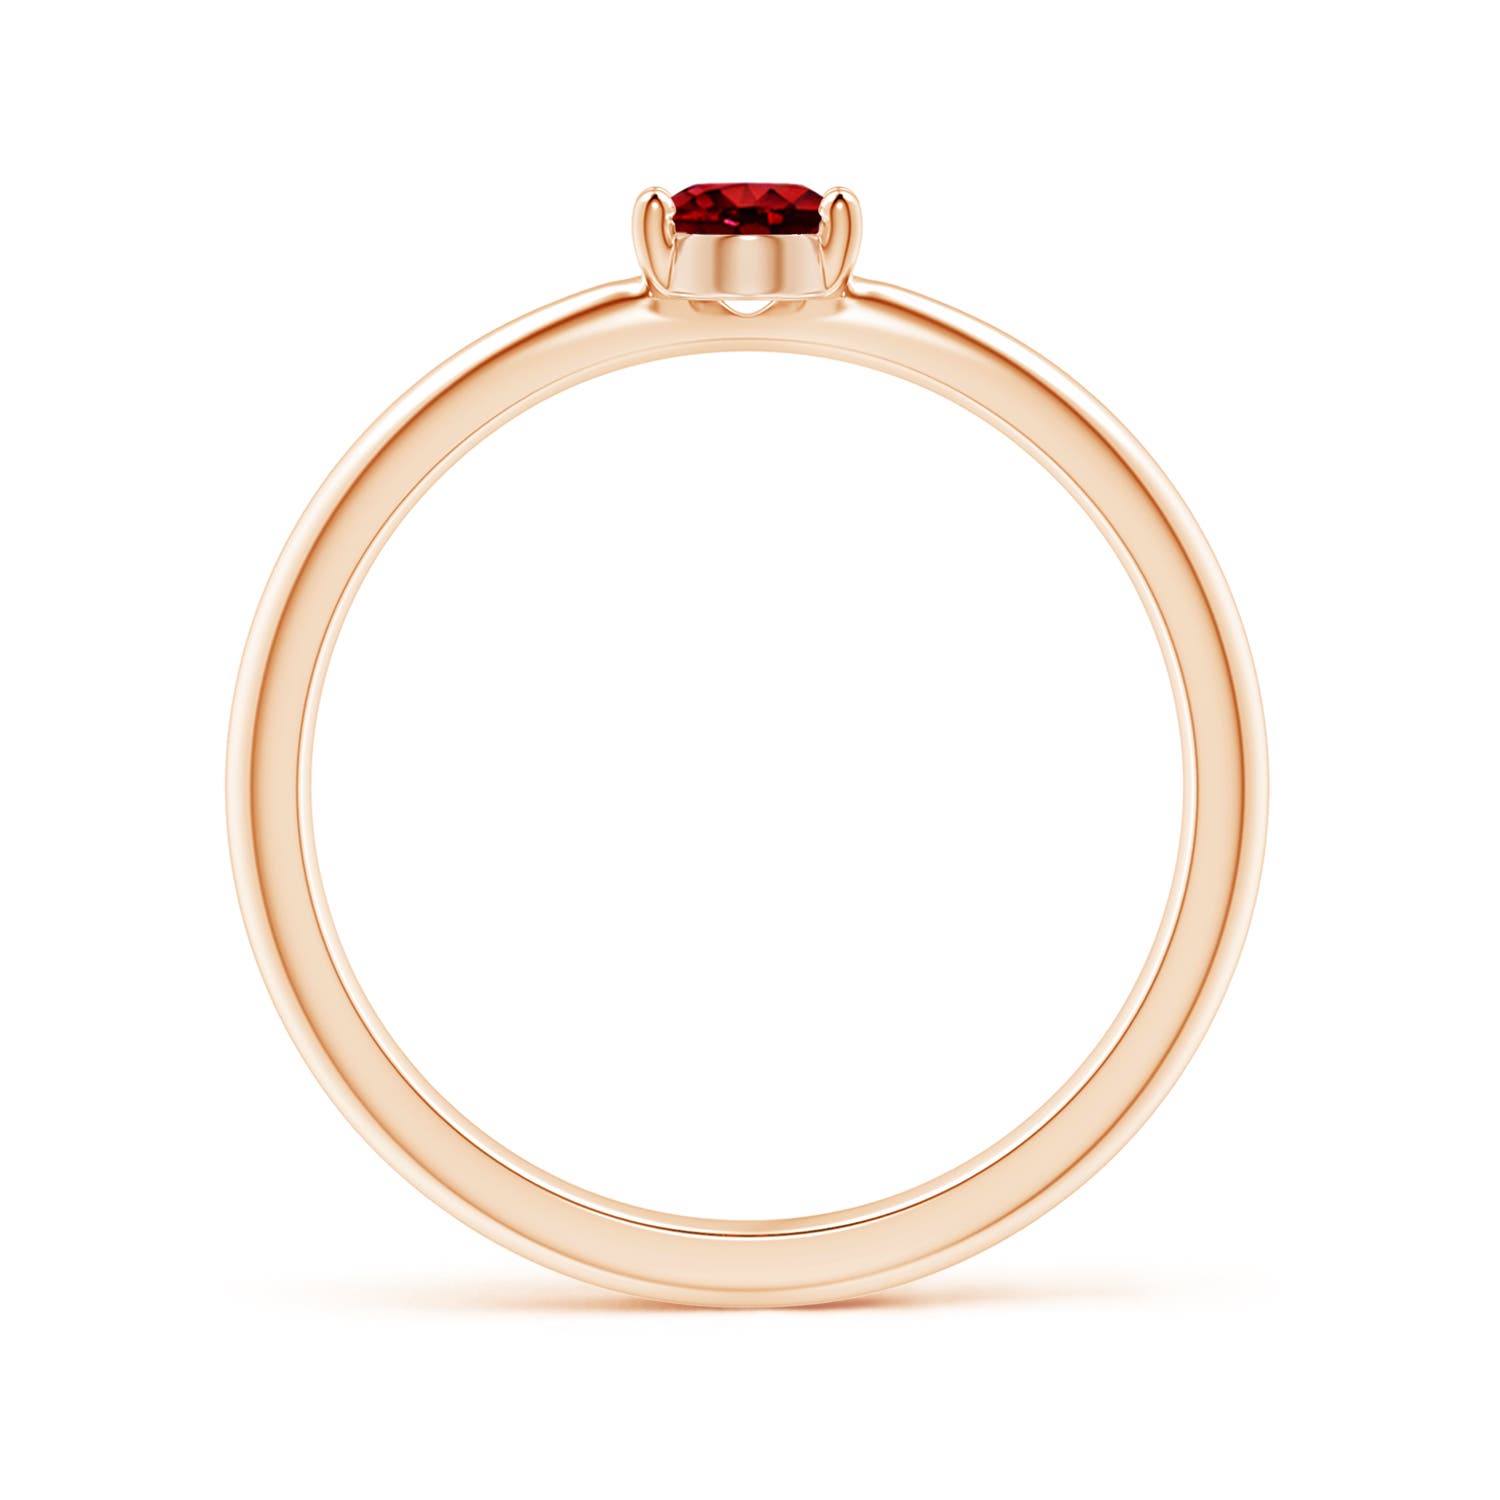 AAAA - Ruby / 0.6 CT / 14 KT Rose Gold